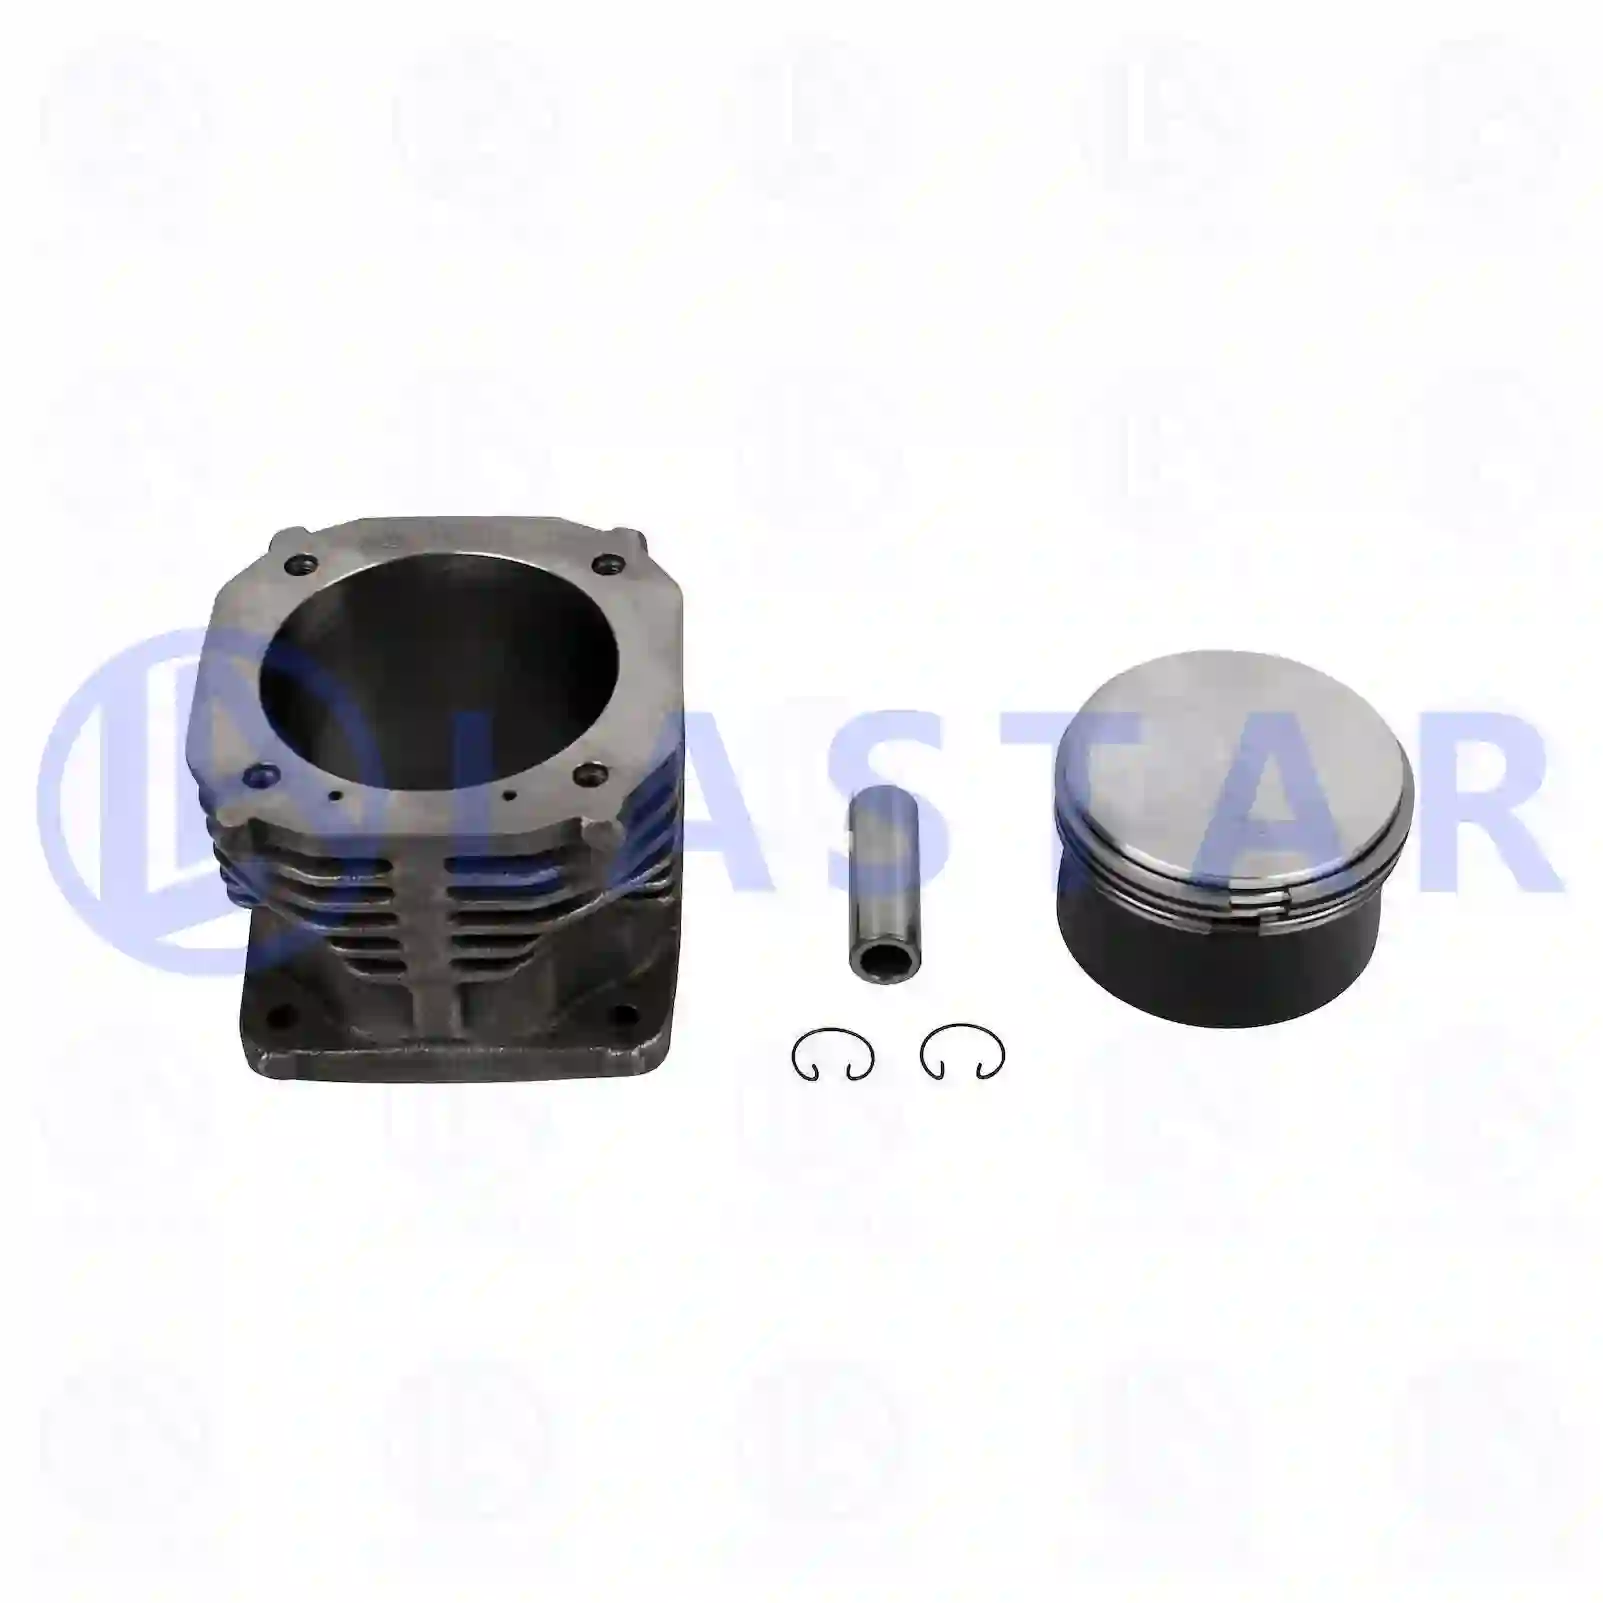 Piston and liner kit, air cooled, 77713878, 51541050003, 51541050007, 51541056003, 51541056006, 51541190001, 51541190003, 51541190005, 51541190006, 51541190014, 51541197001, 51541197003, 51541197004, 4031300008, 4031300117, 4031310002, 4031311002, 4031312002, 4421300002, 4421300008, 4421300608, ZG50559-0008 ||  77713878 Lastar Spare Part | Truck Spare Parts, Auotomotive Spare Parts Piston and liner kit, air cooled, 77713878, 51541050003, 51541050007, 51541056003, 51541056006, 51541190001, 51541190003, 51541190005, 51541190006, 51541190014, 51541197001, 51541197003, 51541197004, 4031300008, 4031300117, 4031310002, 4031311002, 4031312002, 4421300002, 4421300008, 4421300608, ZG50559-0008 ||  77713878 Lastar Spare Part | Truck Spare Parts, Auotomotive Spare Parts